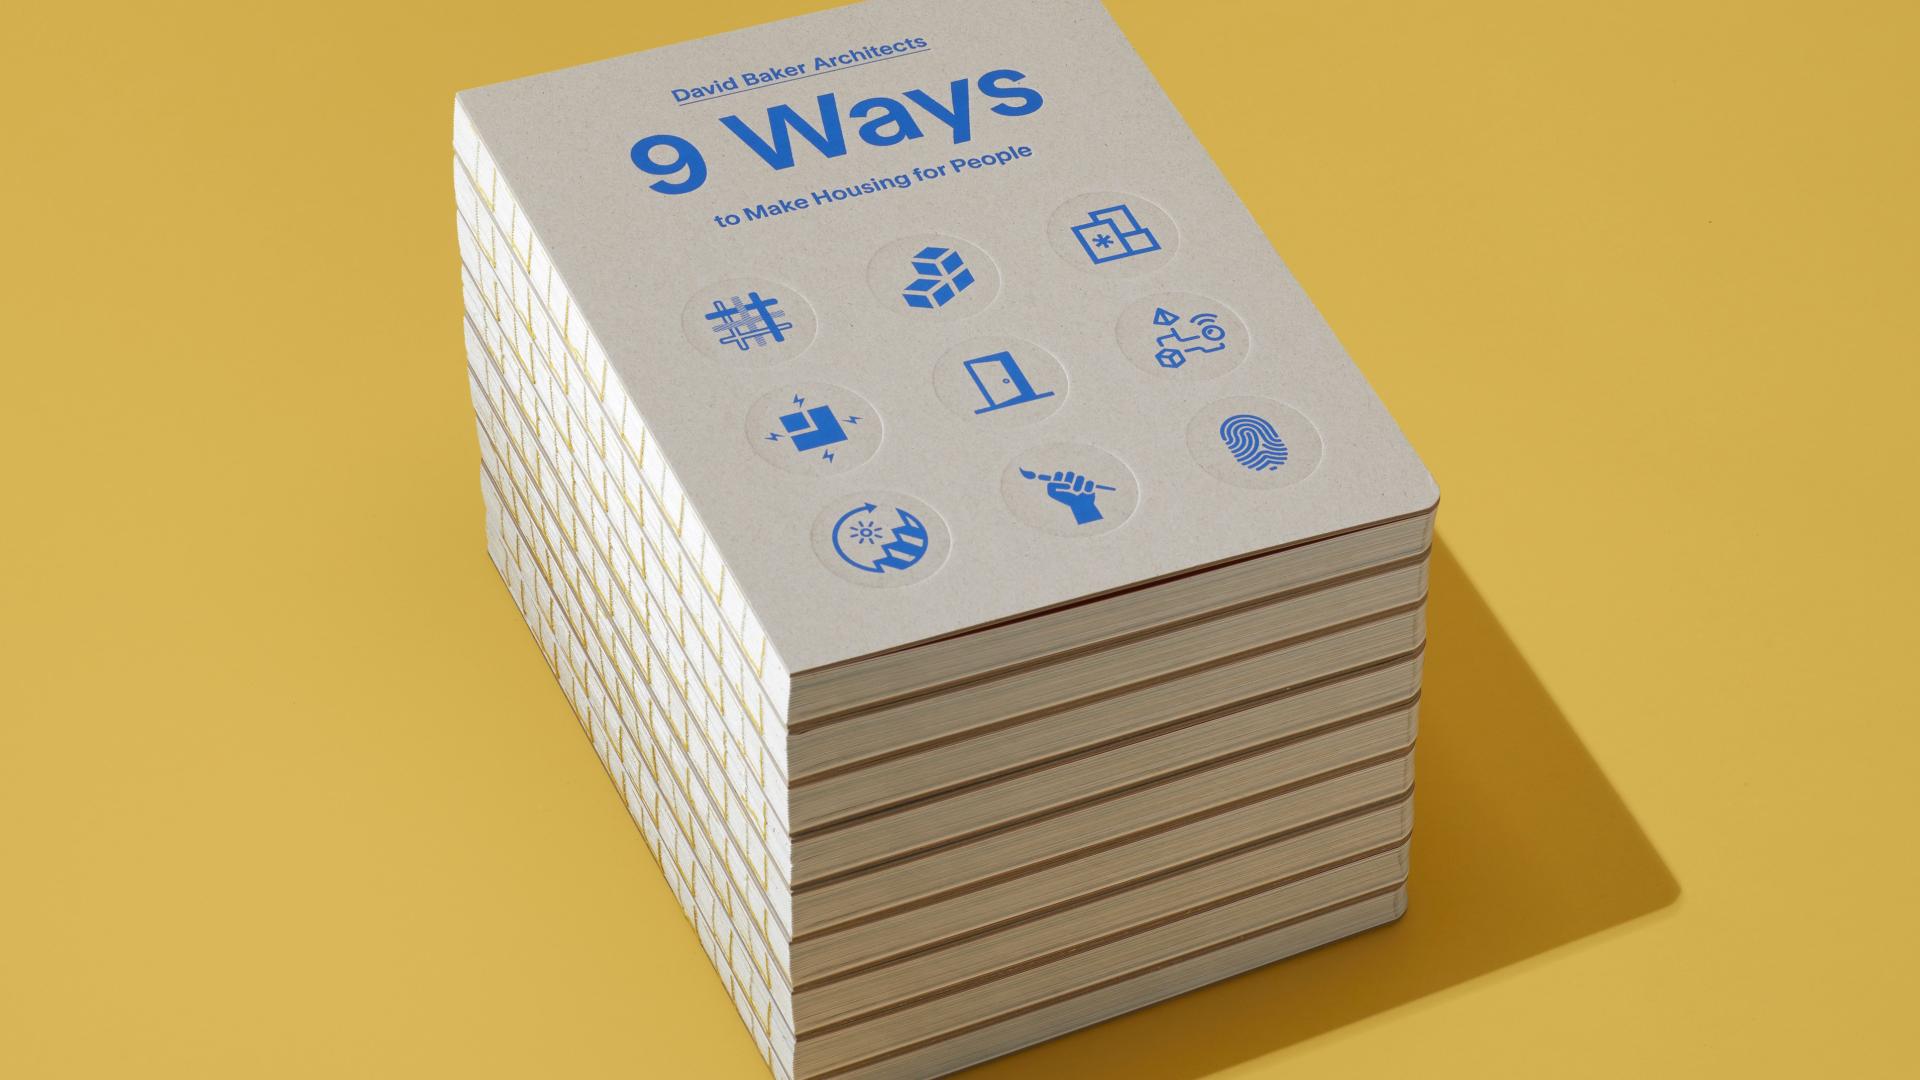 Stack of DBA's new book 9 Ways to Make Housing for People on a bright yellow background.